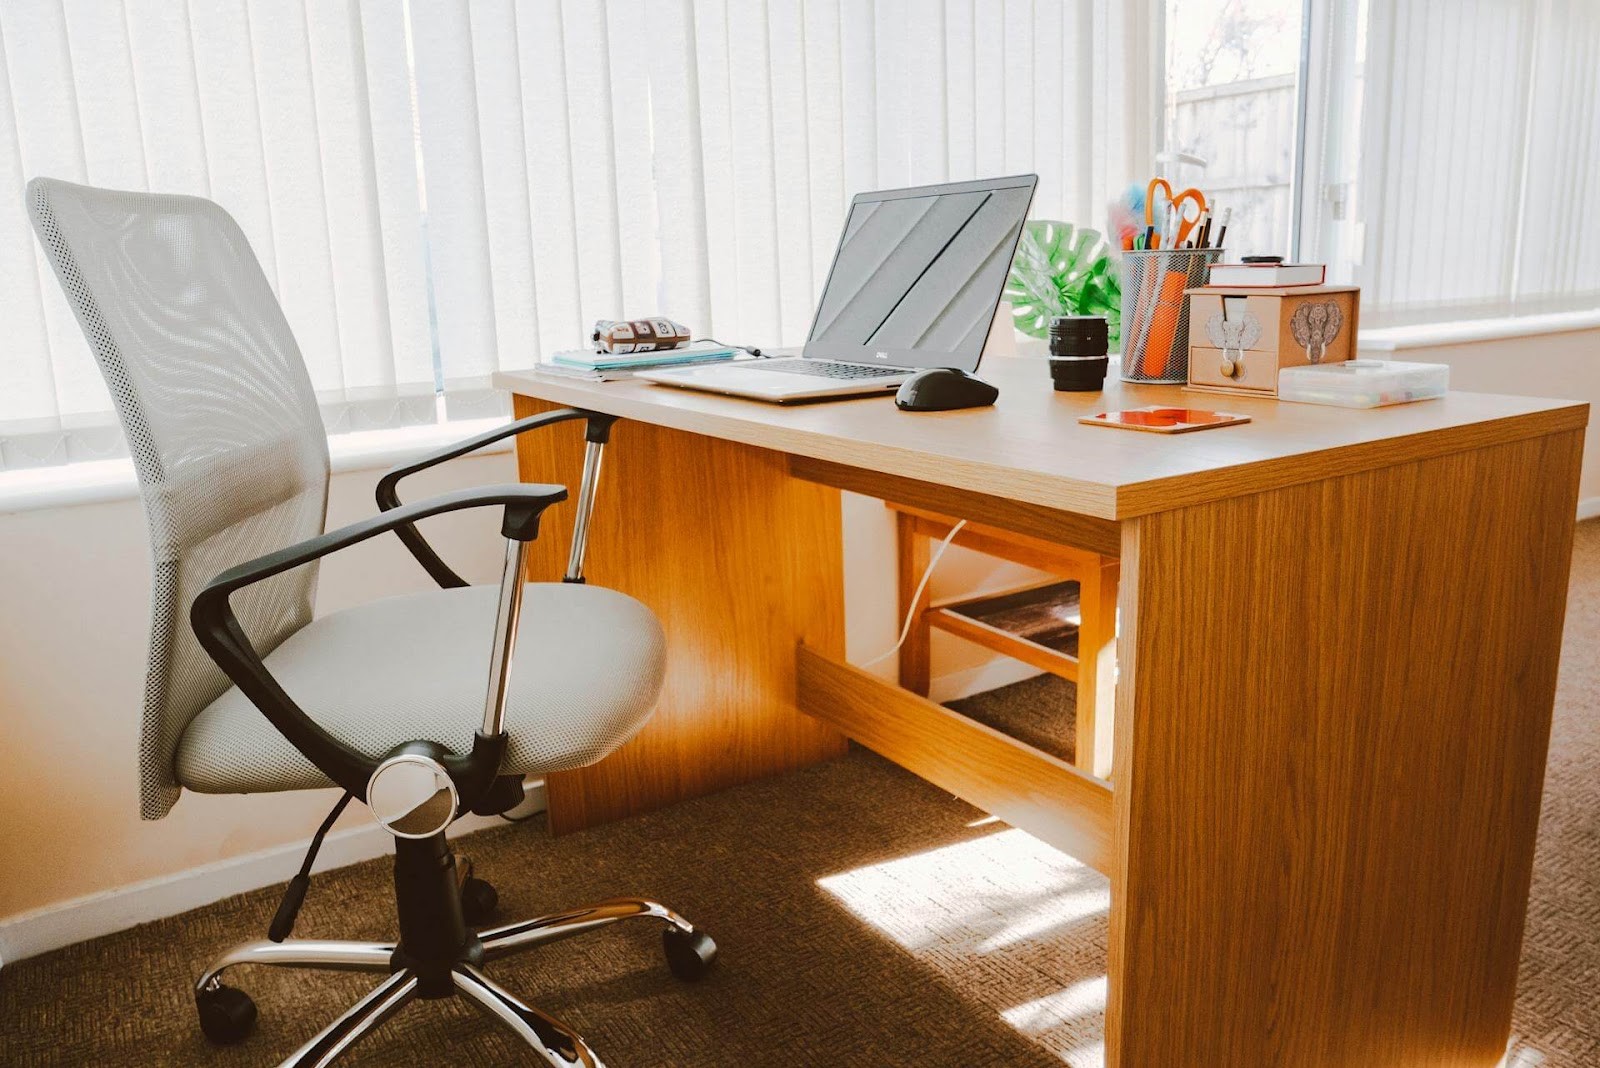 A wooden office table desk has always been a classic choice for employees and managers in workplaces around the world